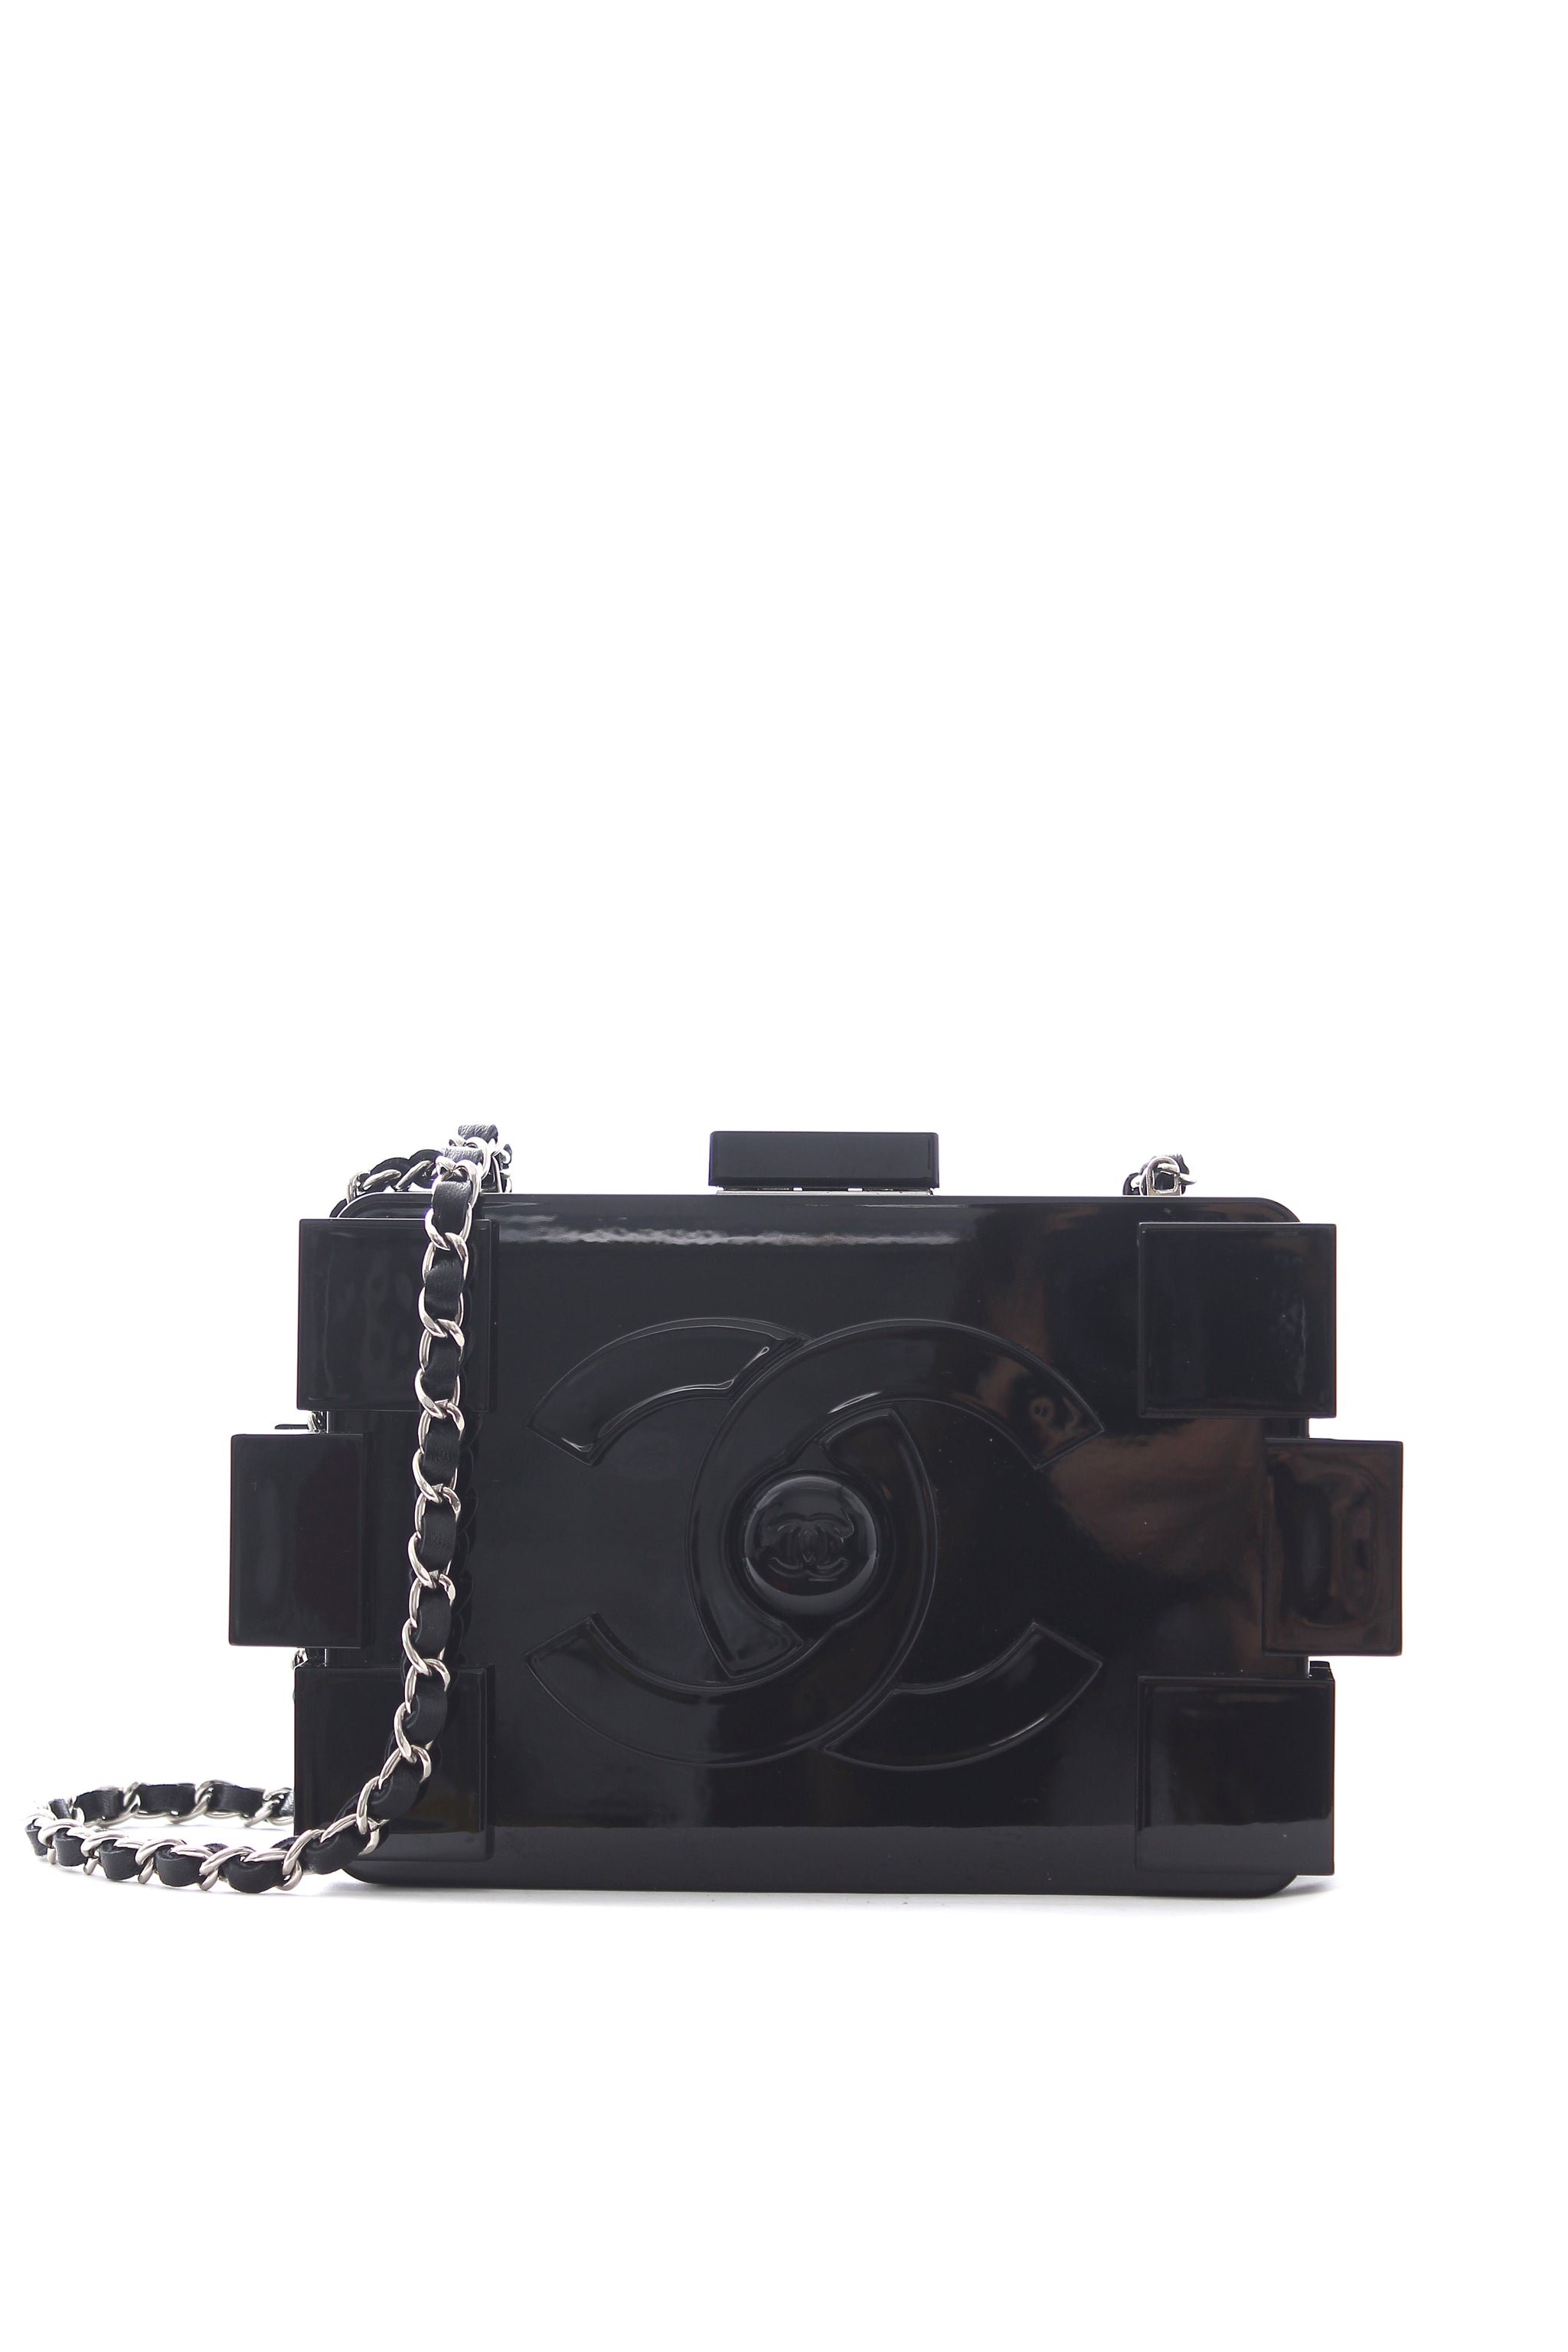 10 Eccentric Chanel Bags We Can't Get Over - PurseBop